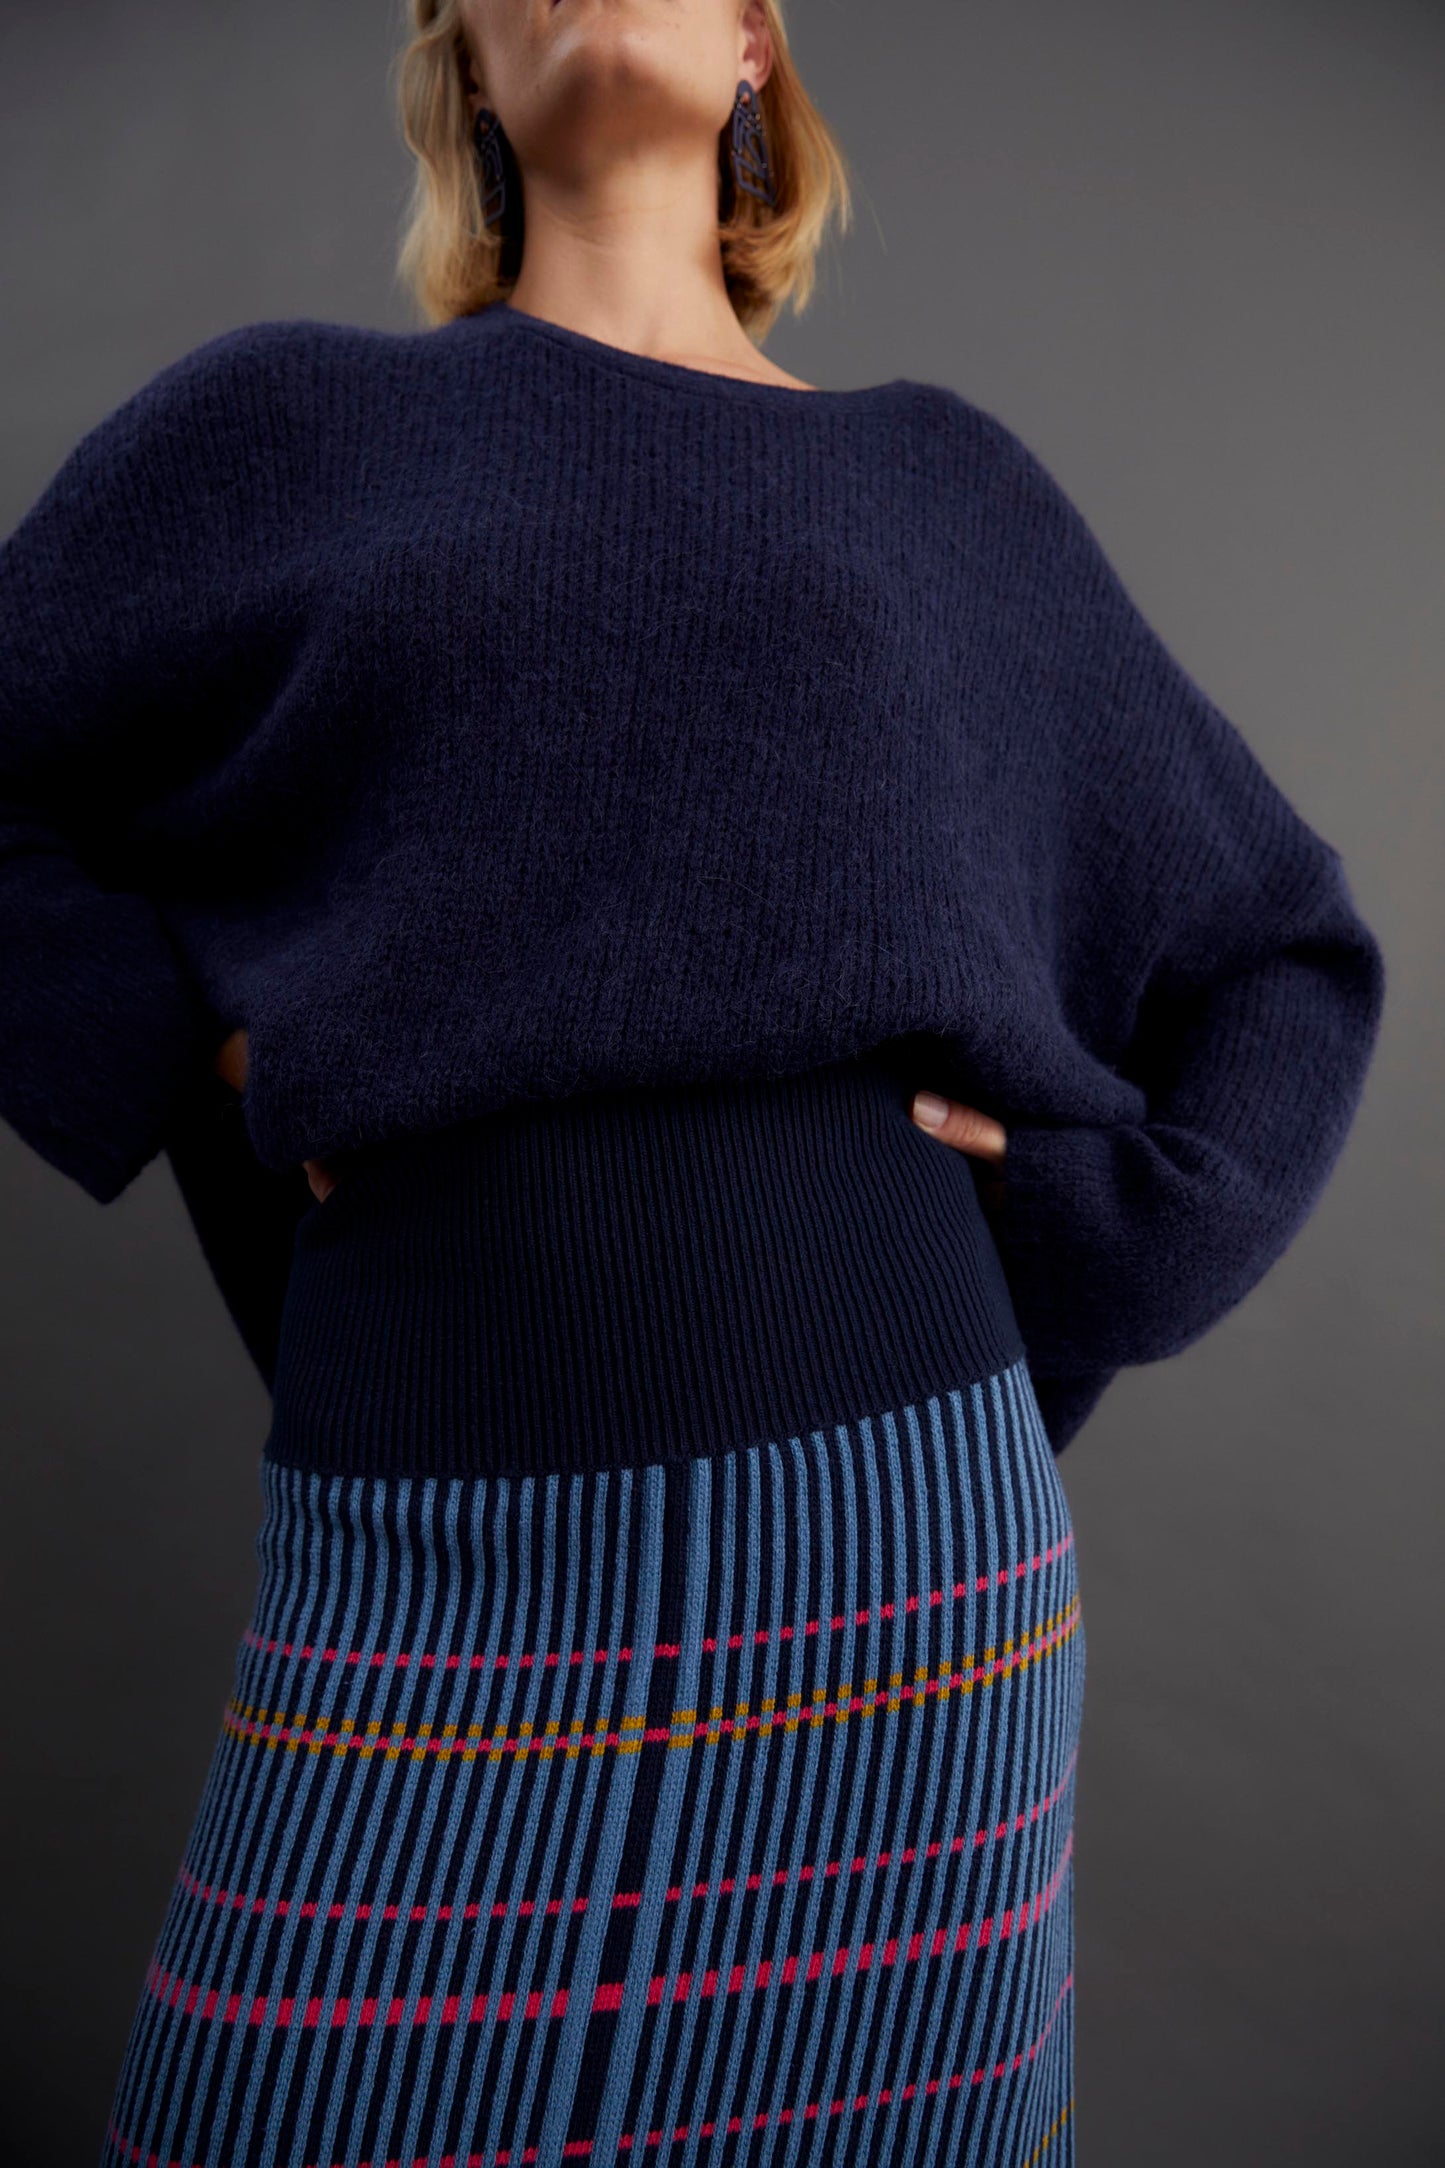 Agna Merino and Alpaca Wool Sweater Front Campaign Model | STEEL BLUE